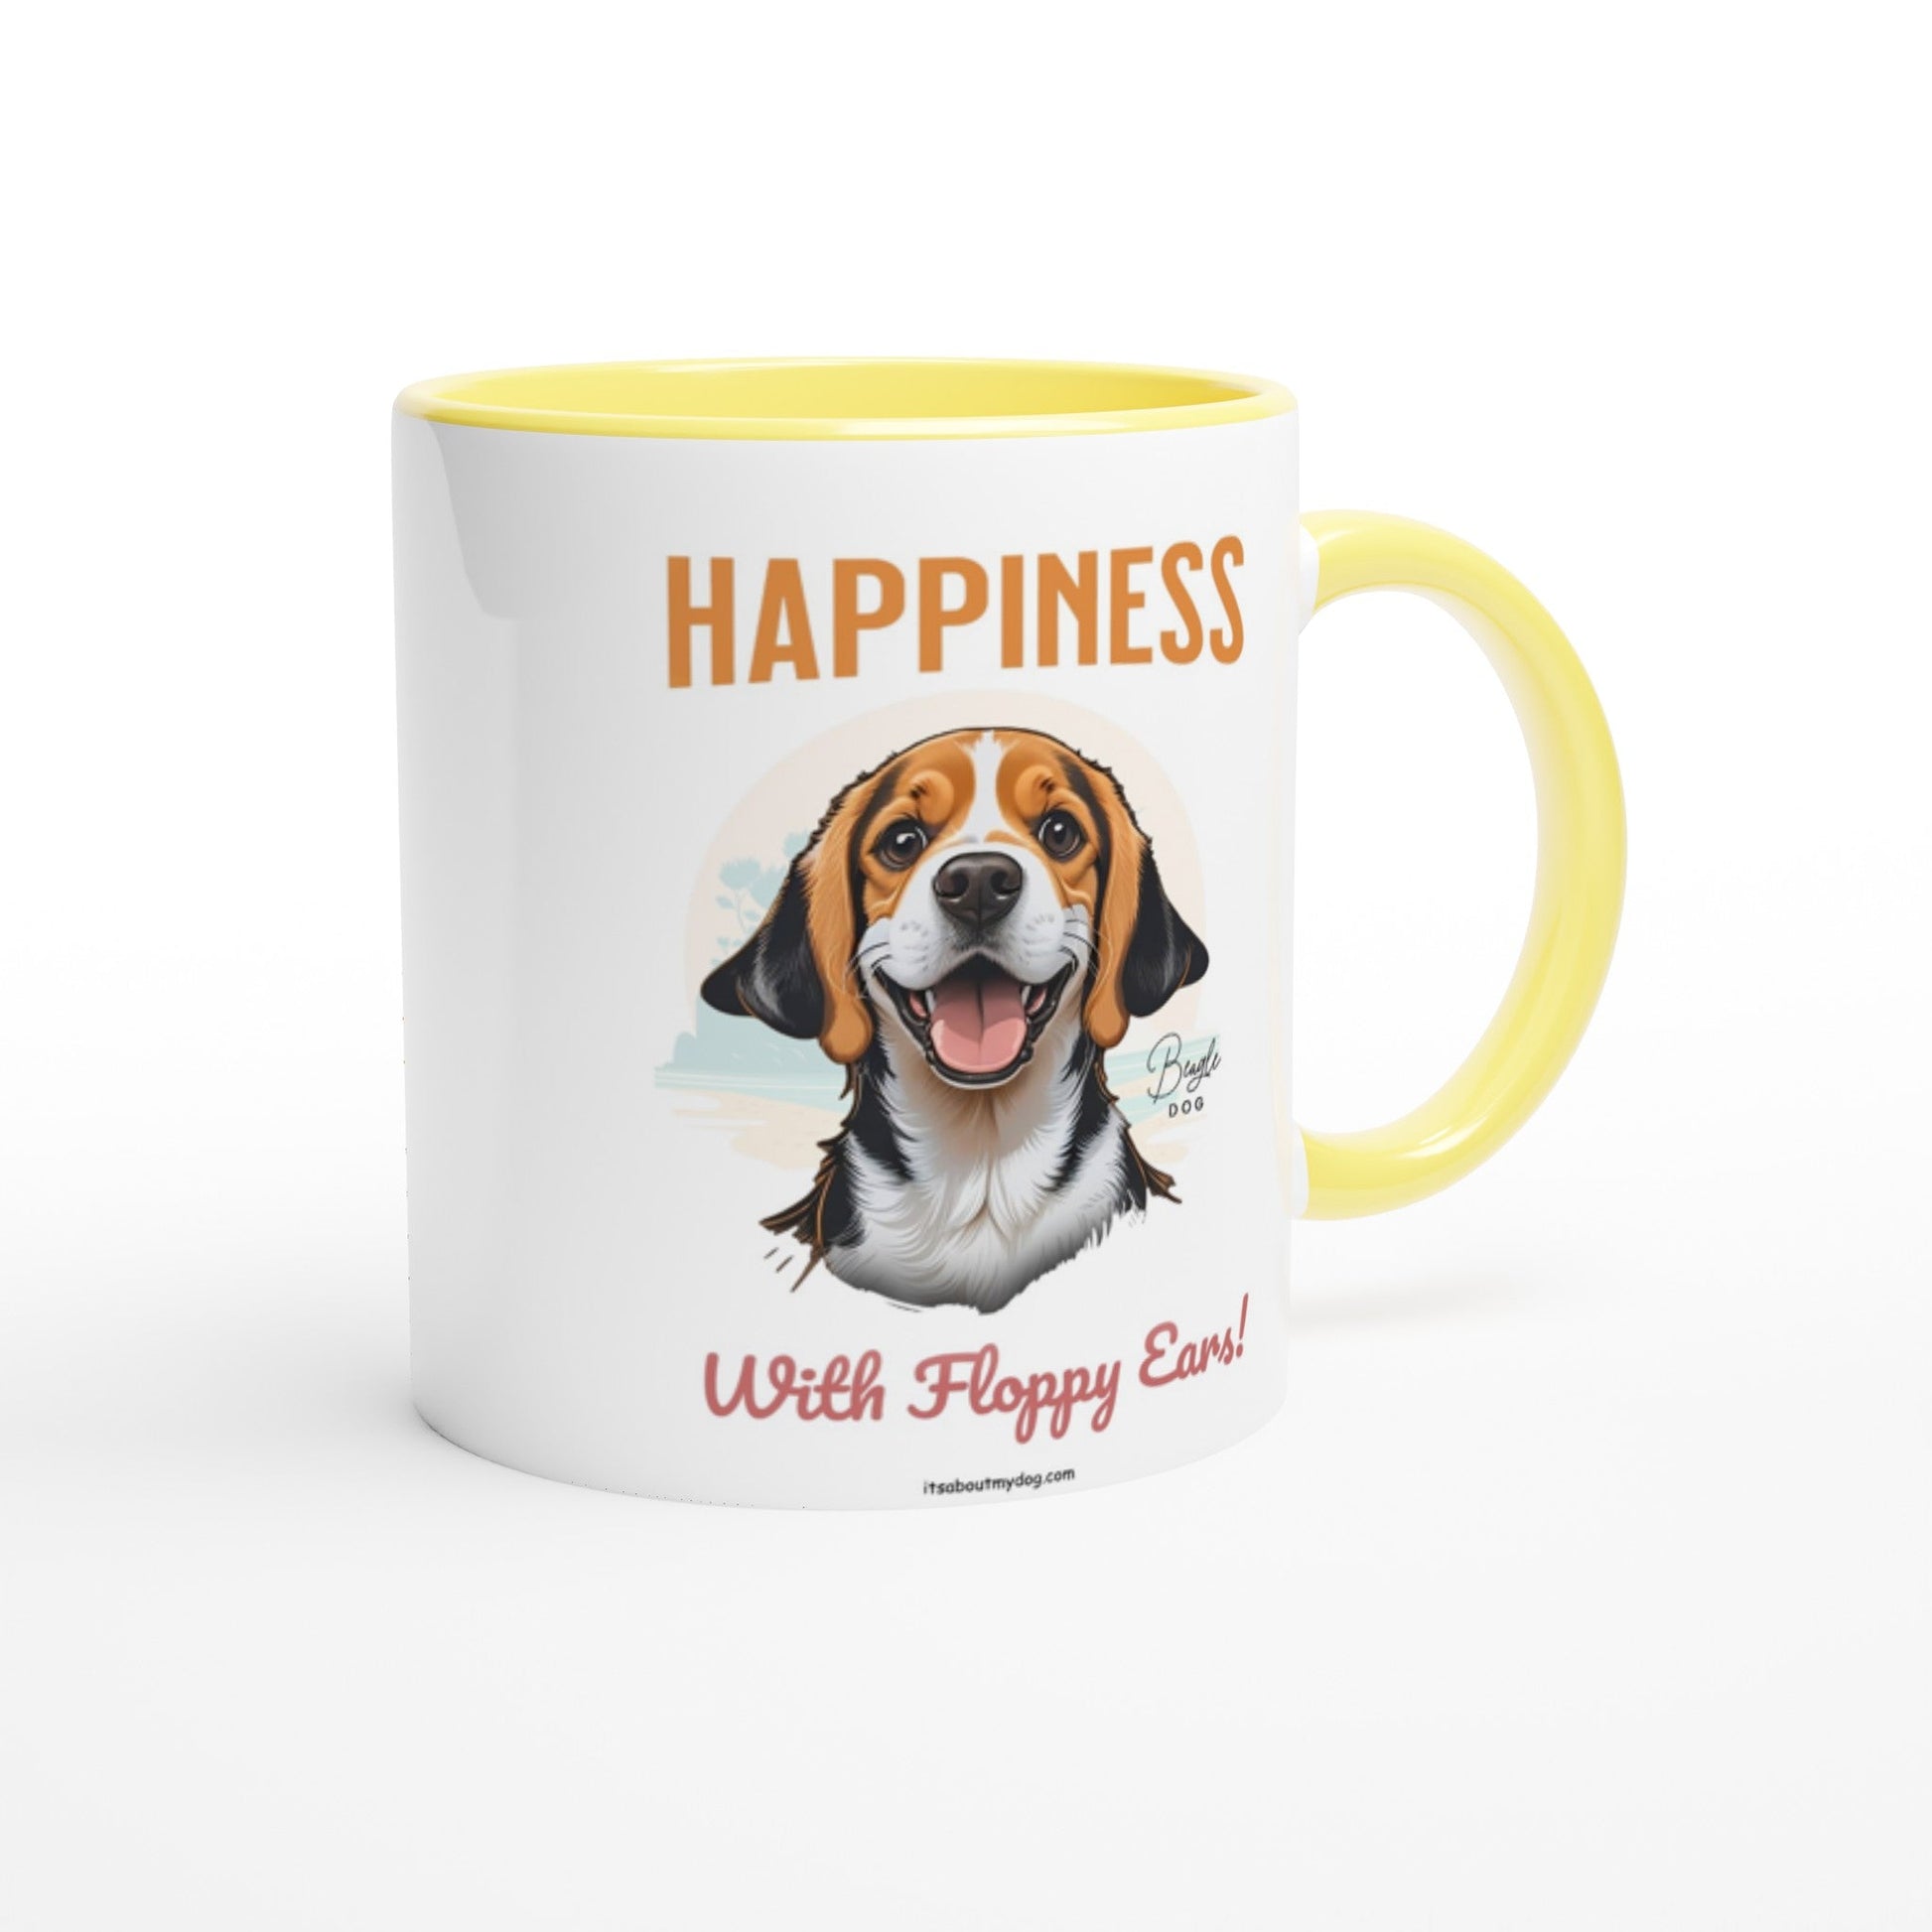 Beagle-11oz Ceramic Mug17.99-(FREE Delivery) Shop now at itsaboutmydog.com, Beagle, Beagle Dog, beagle dogs lovers, Beagle gift for her, beagle gift ideas, beagle gifts for her, beagle mom gifts, beagle owner gifts, beagle puppies for sale near me, dog mugs, dog mugs uk, gifts for beagle owners